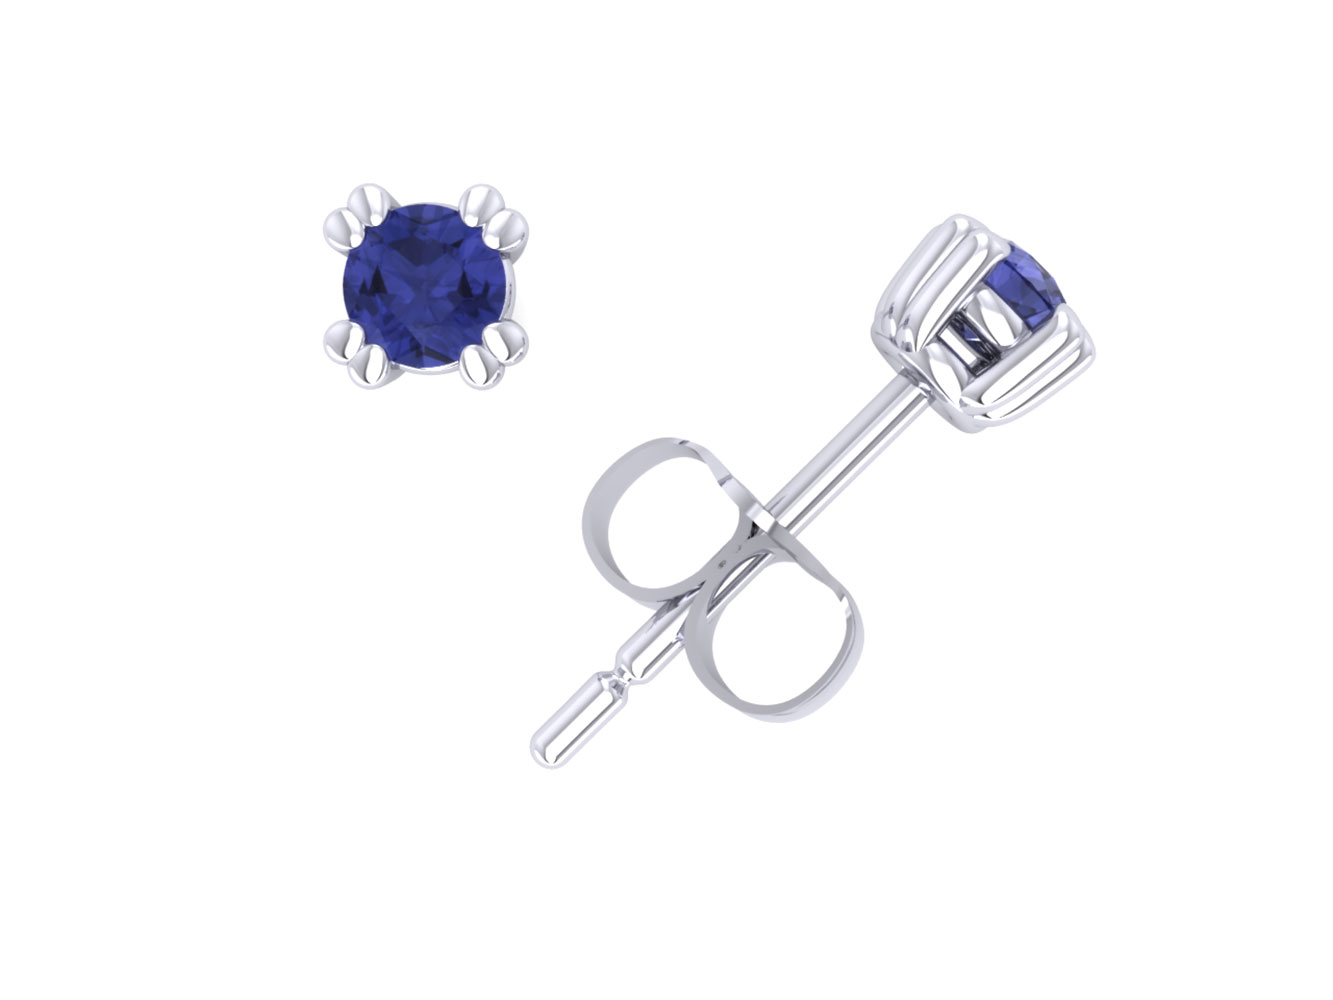 Jewel We Sell 1/4Ct Round Tanzanite Basket Stud Earrings 14k White or Yellow Gold Double Prong Set AAA Quality